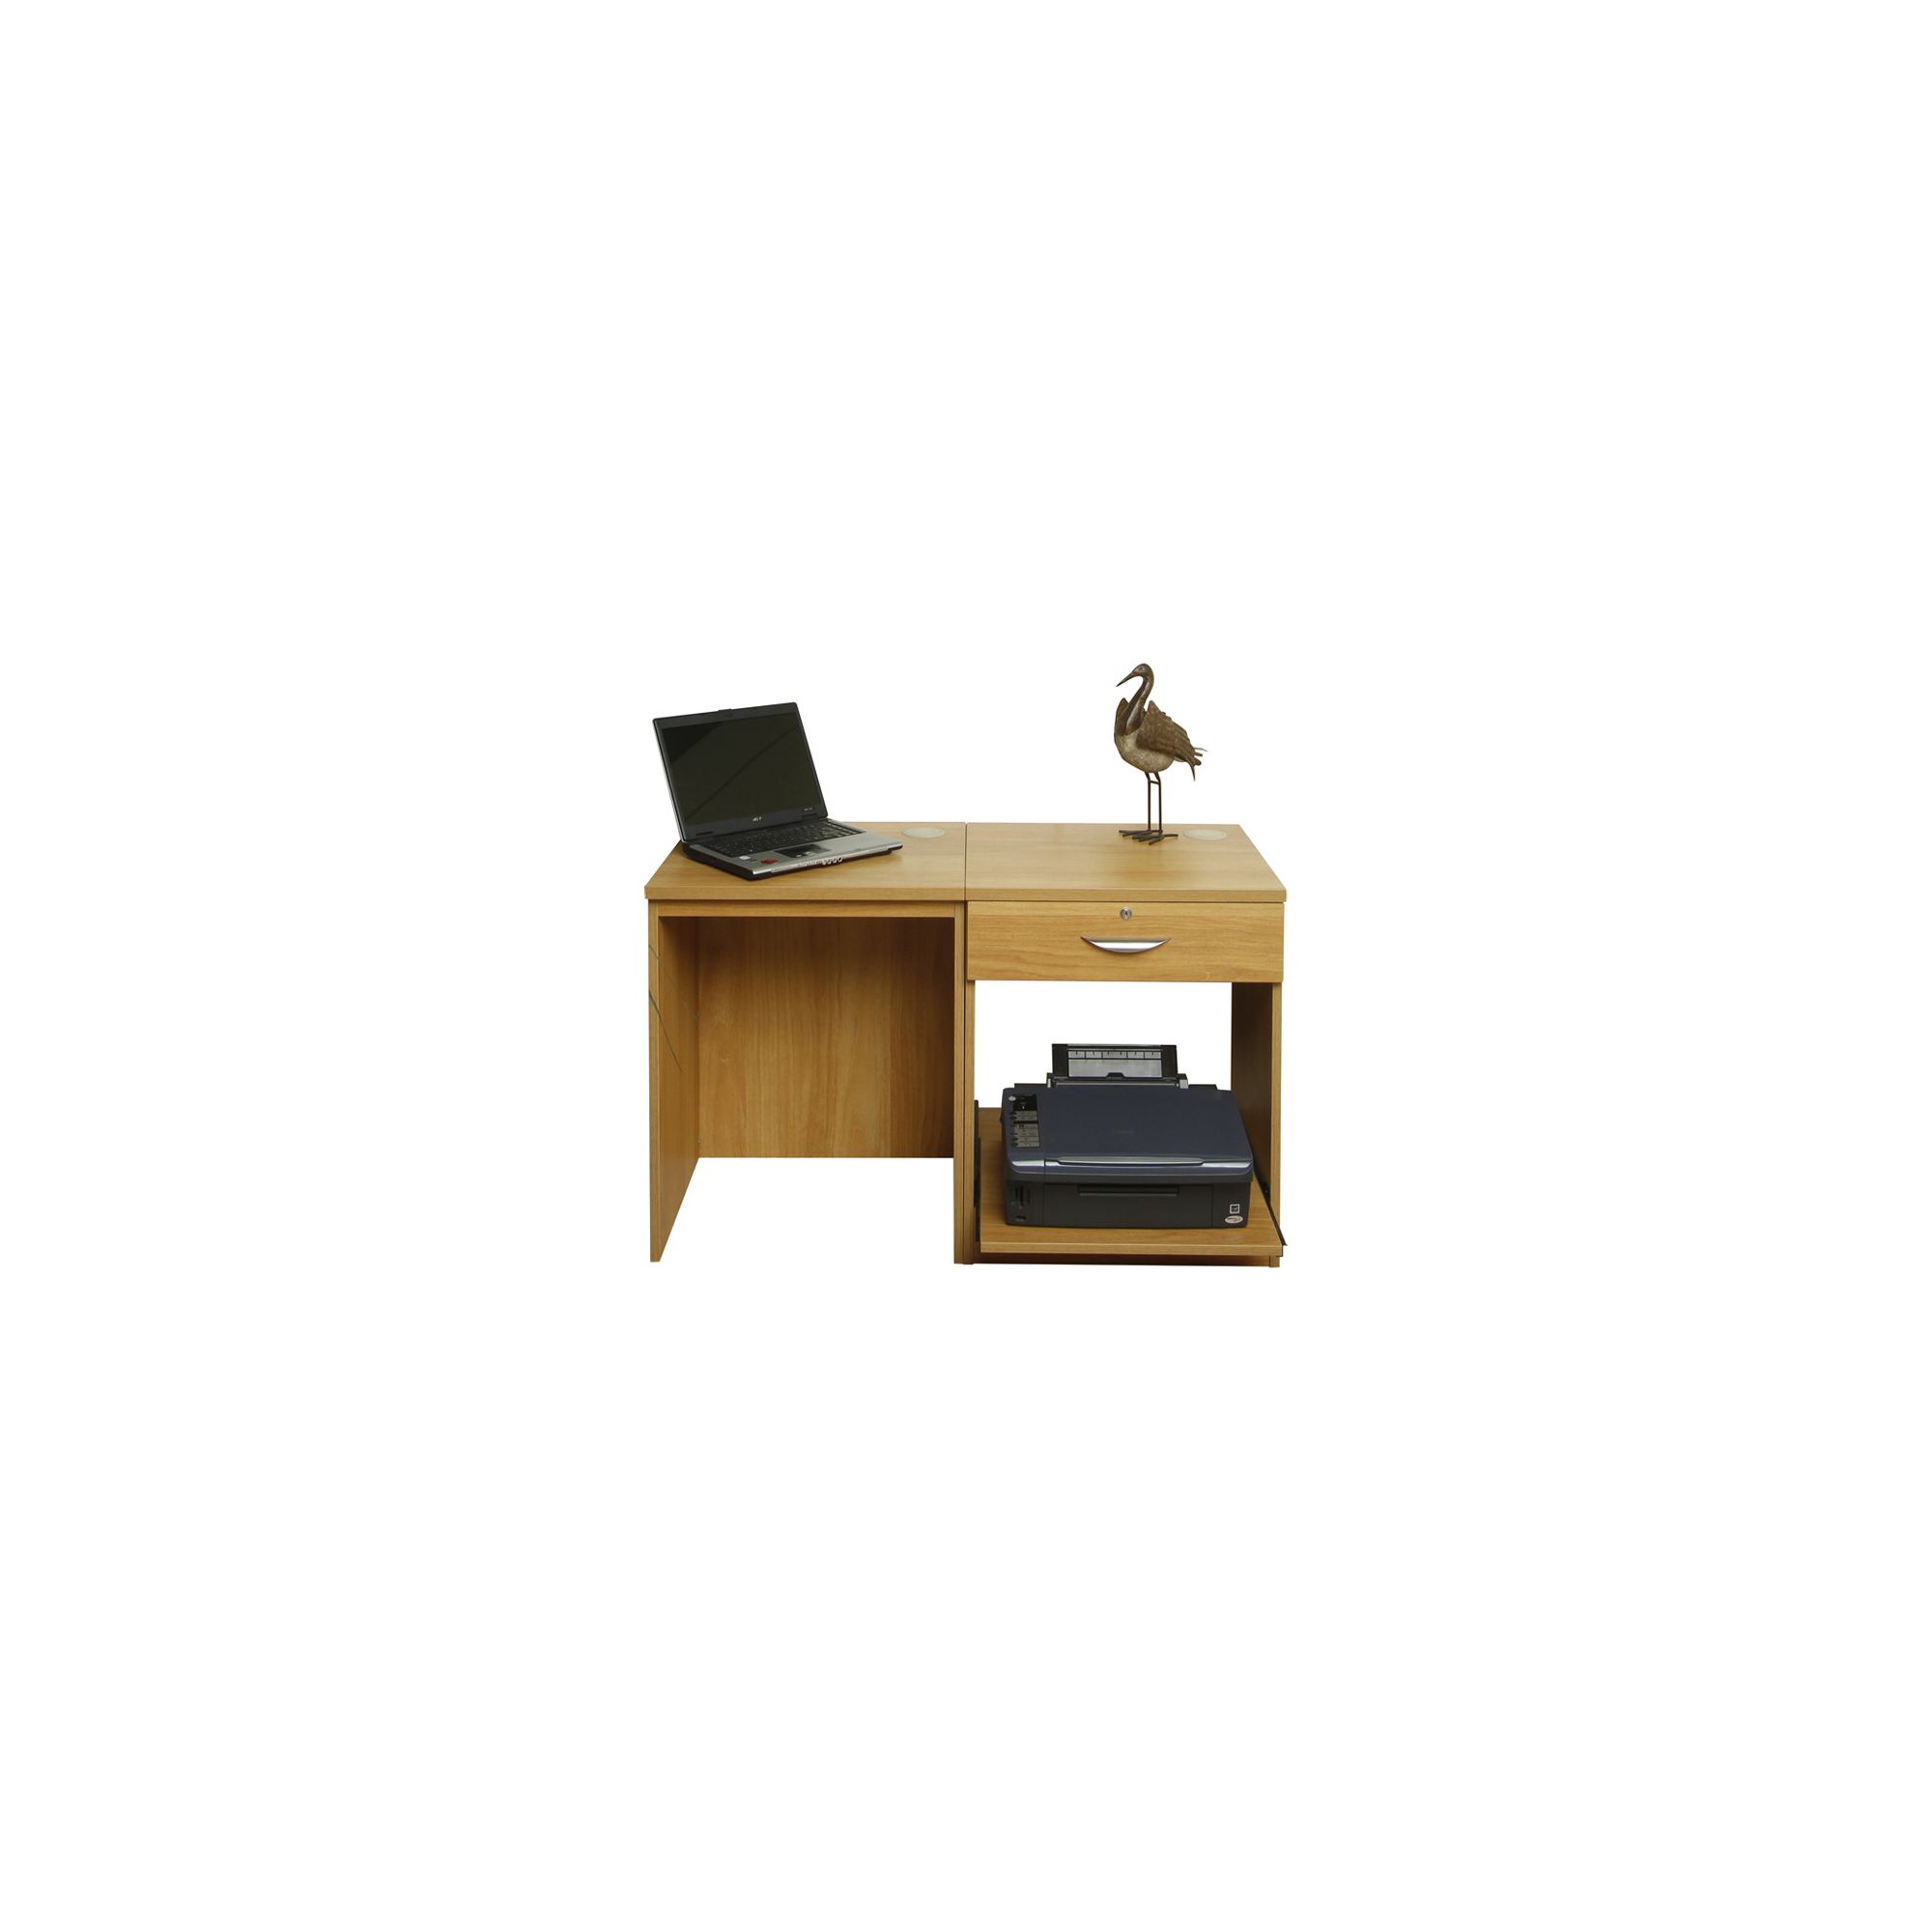 Enduro Home Office Desk / Workstation with Drawer and Printer Storage - Beech at Tesco Direct